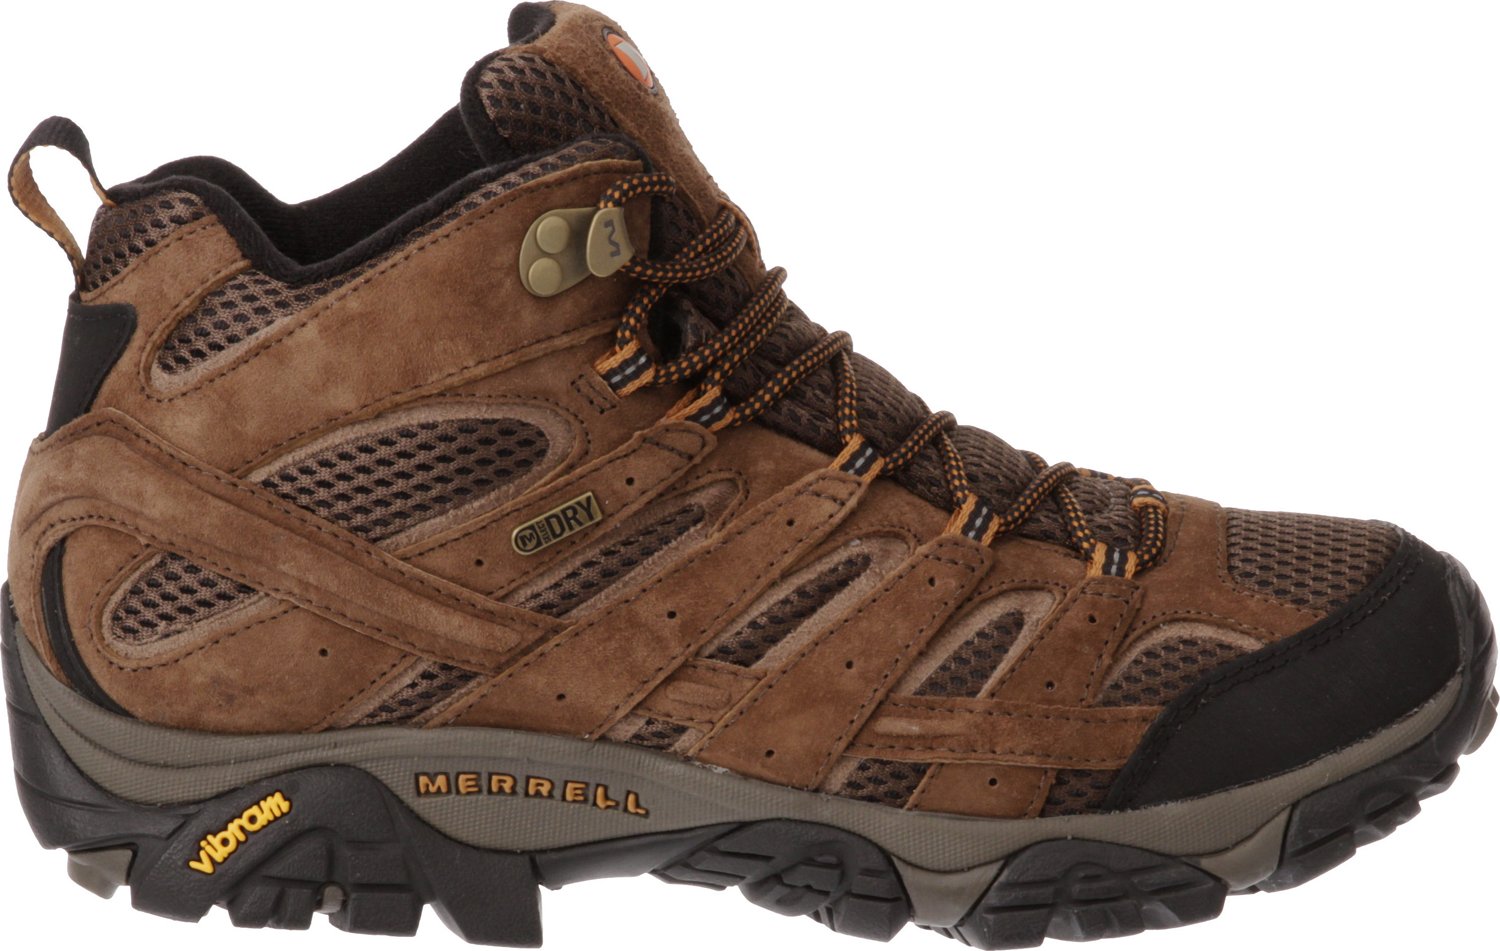 MOAB 2 Mother-of-All-Boots™ Waterproof Shoes | Academy